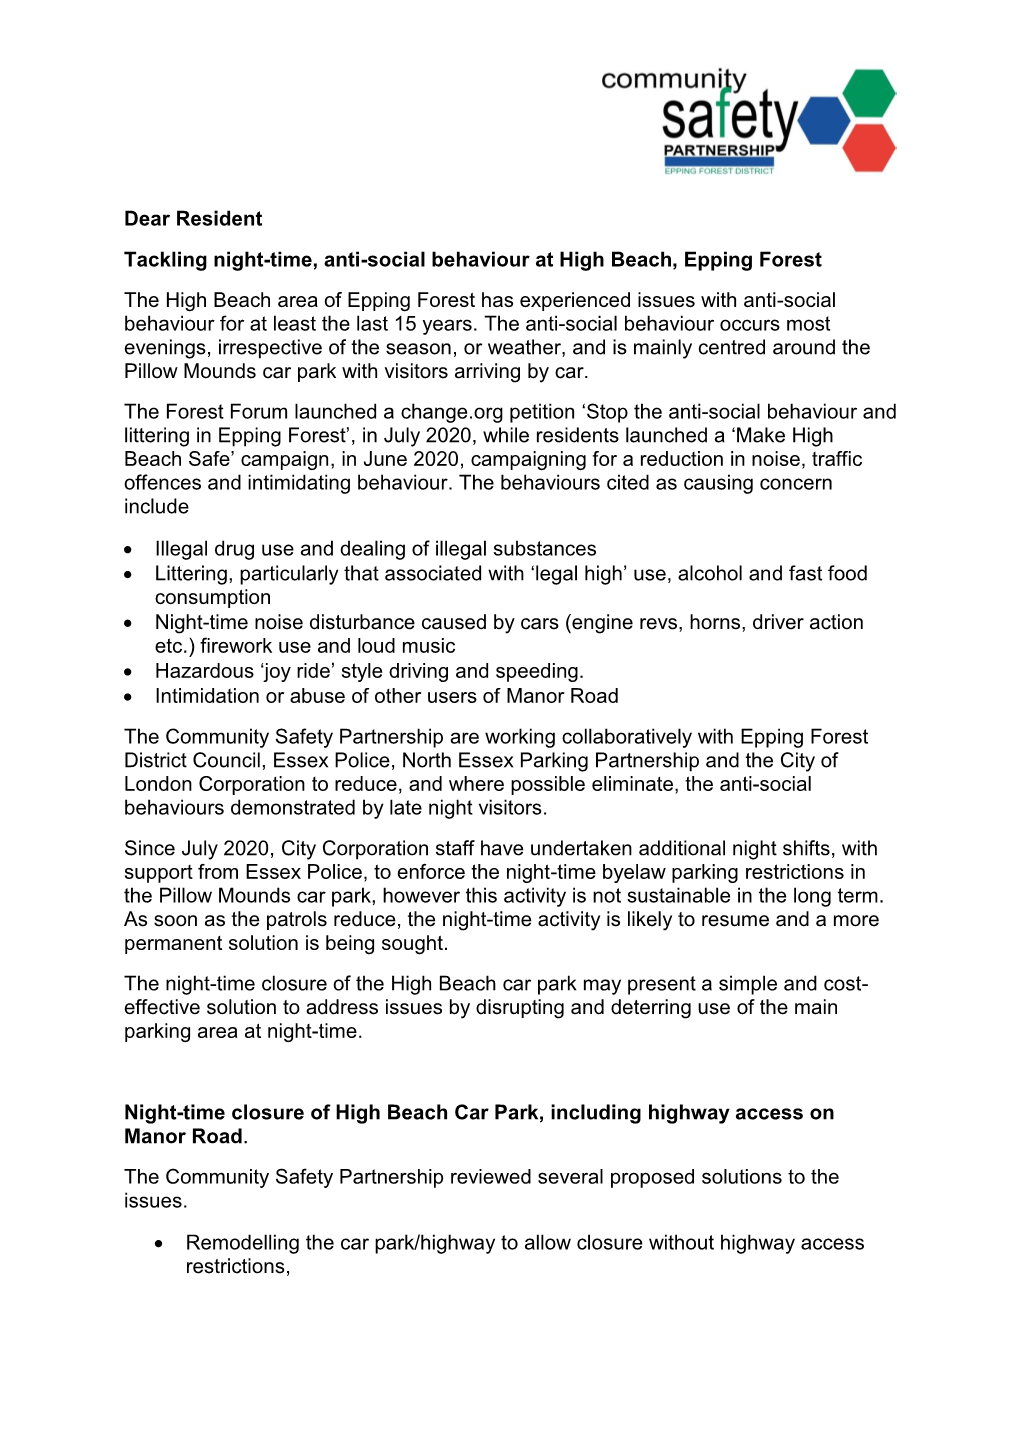 ETRO Letter to Residents High Beach PDF 181 KB